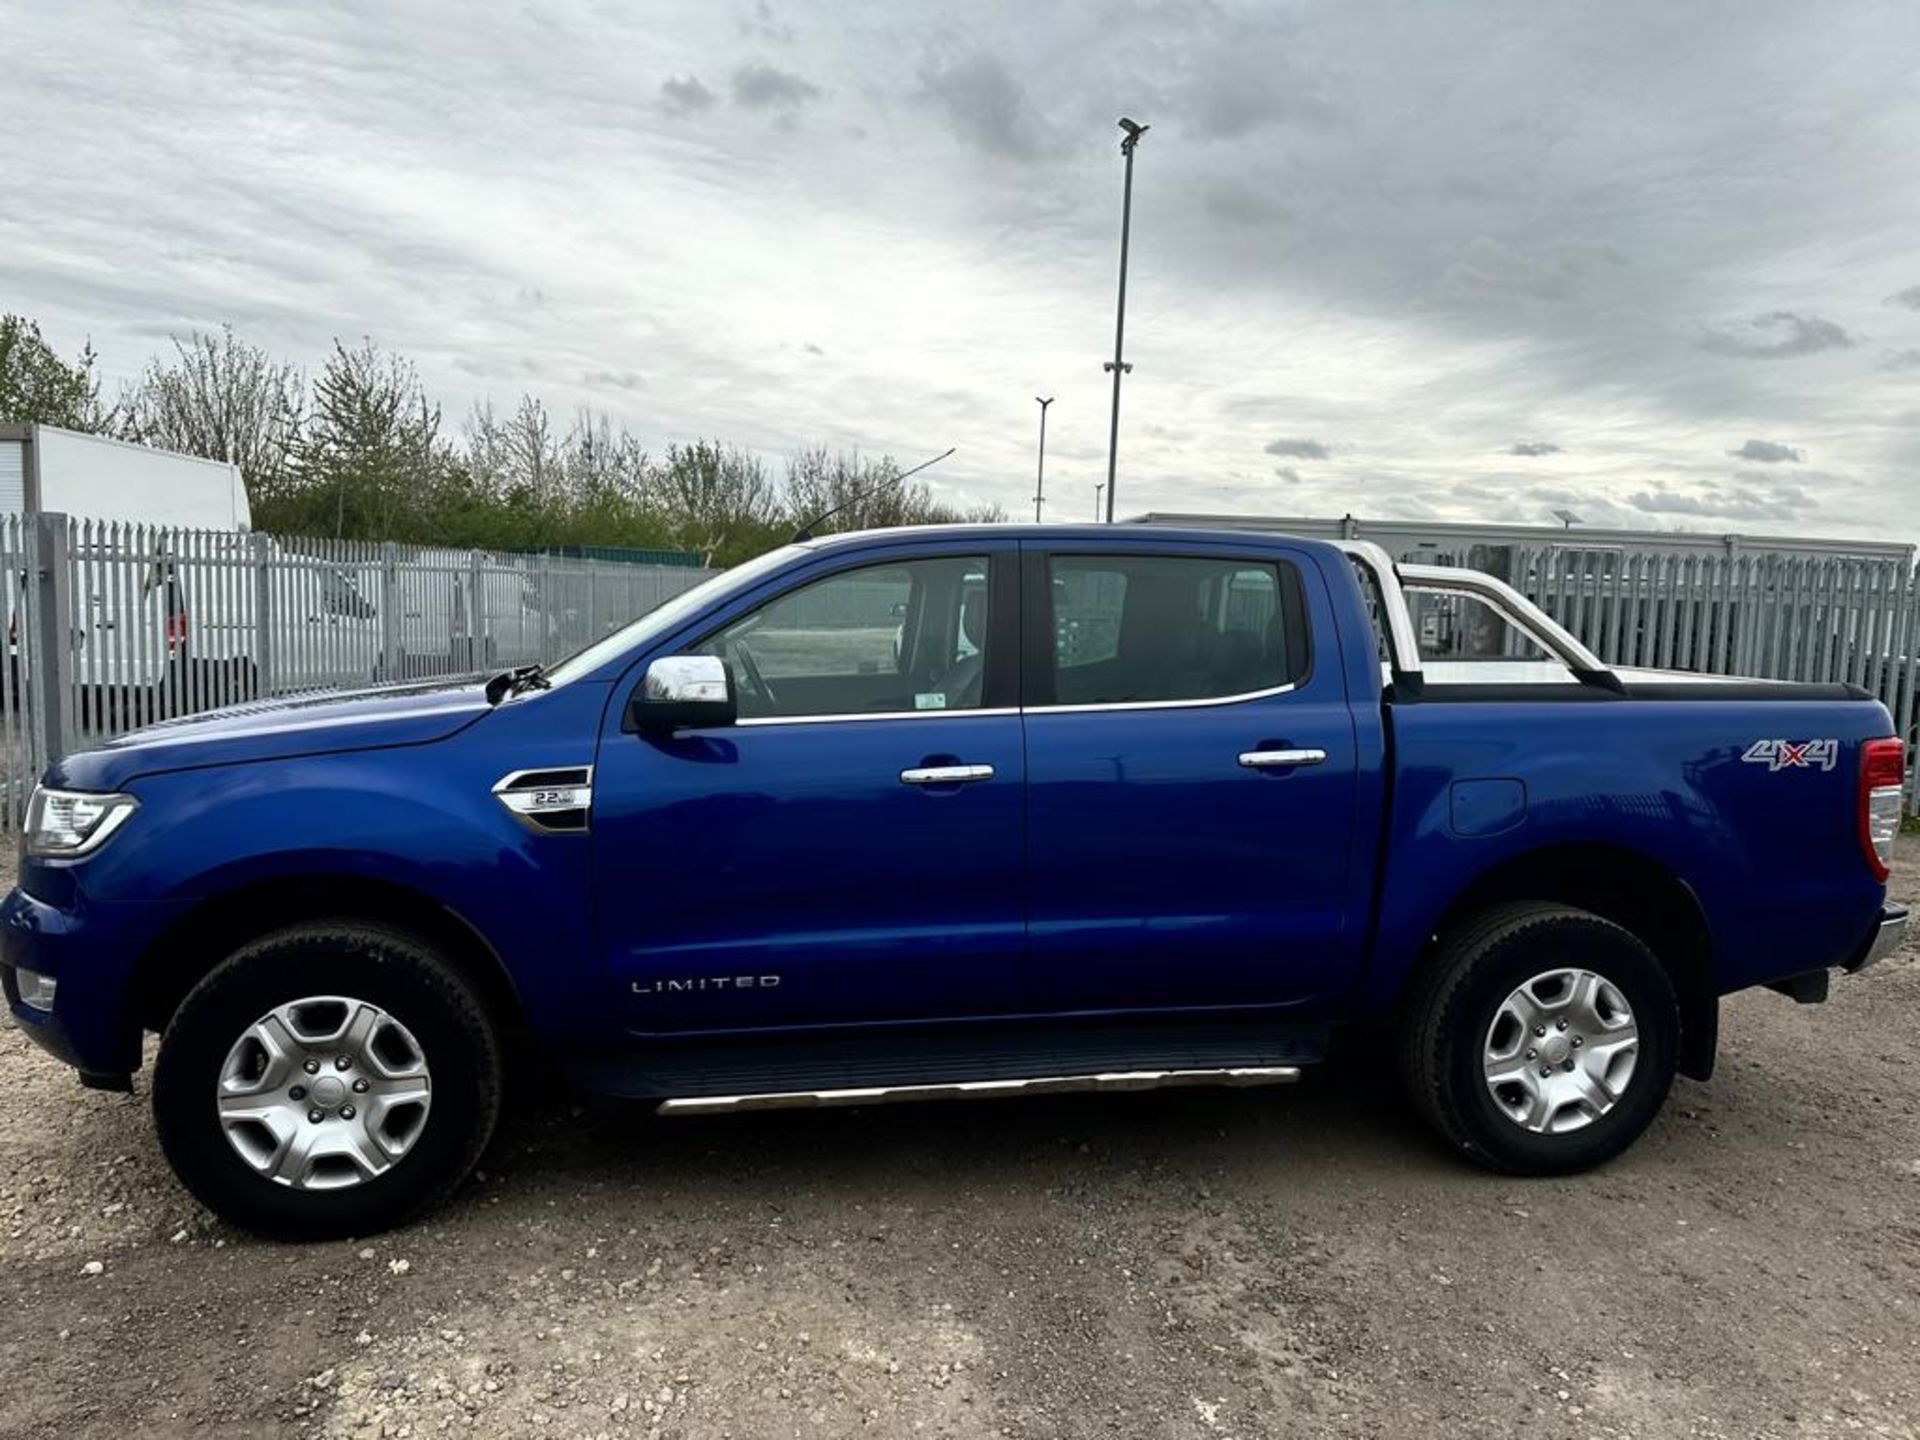 ** ON SALE ** Ford Ranger Limited DCI TDCI 160 4X4 2016 '16 Reg'-Automatic - A/C - -Bluetooth-No Vat - Image 6 of 38